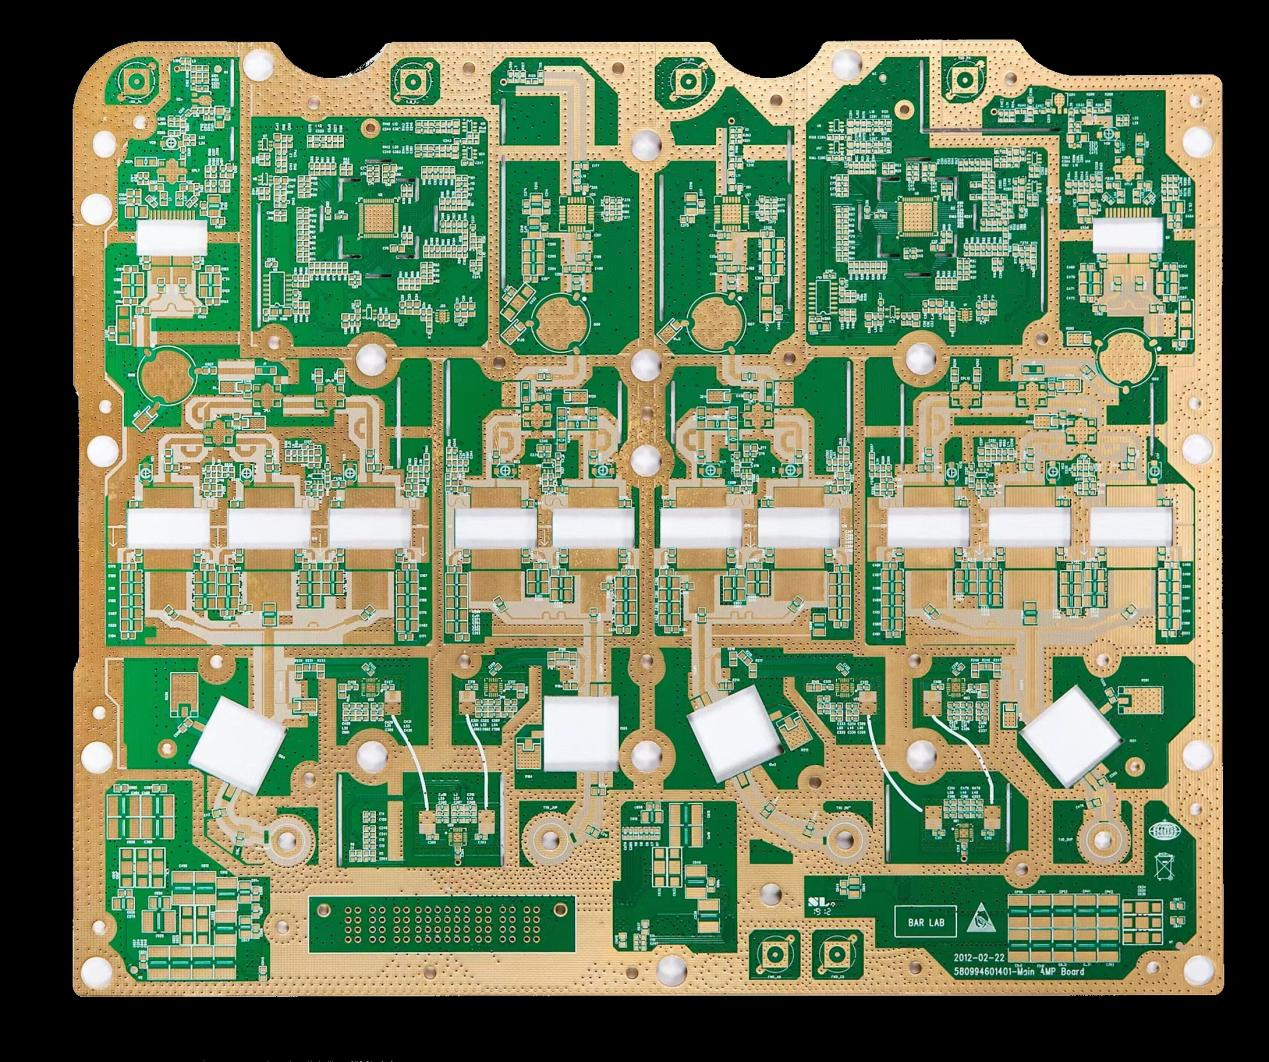 PCB board and integrated circuit analysis